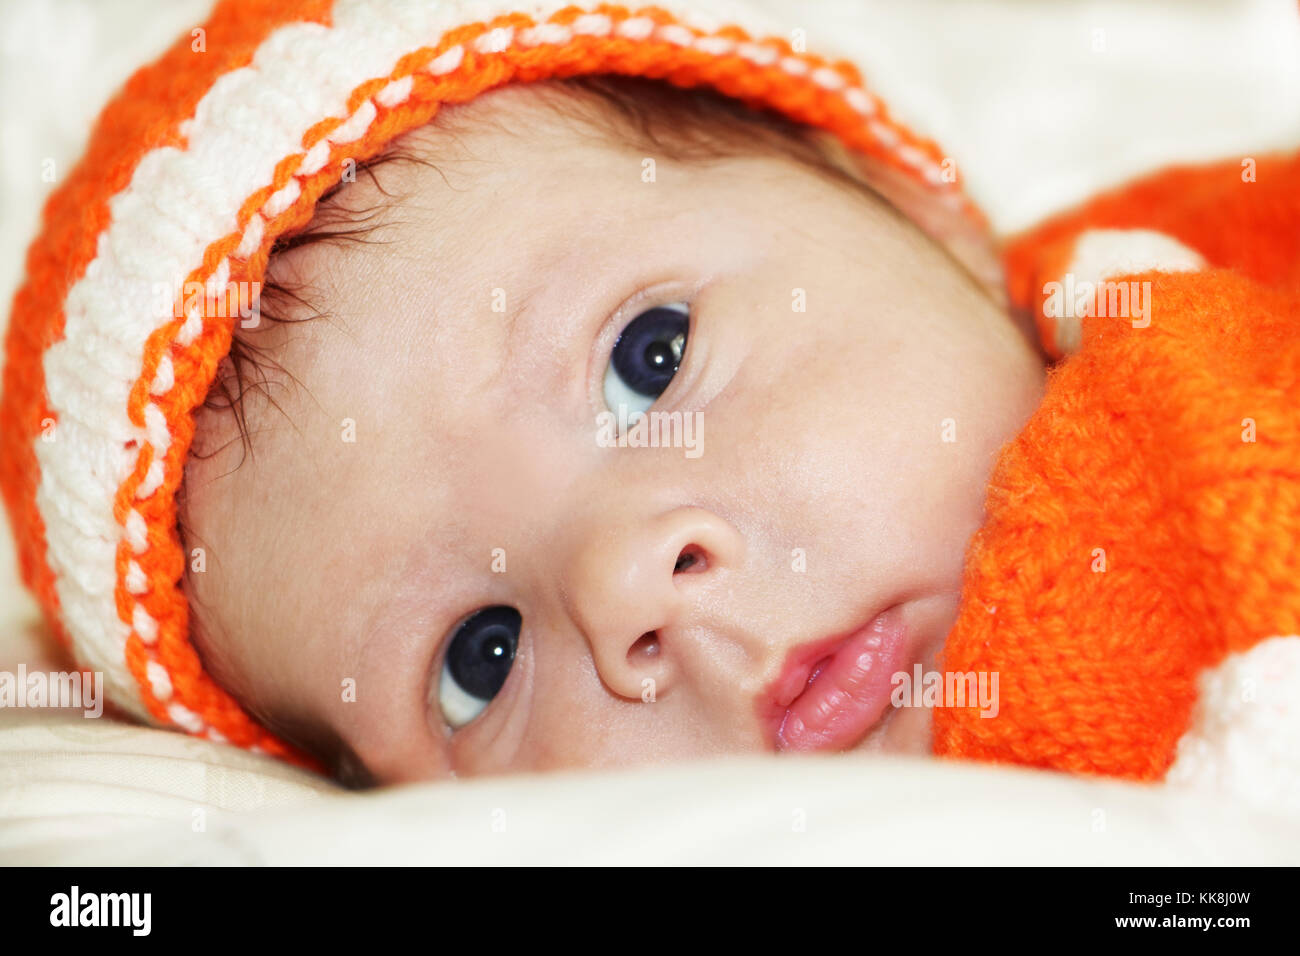 Pensive baby. Portrait of meditative newborn baby with beautiful blue eyes  in orange knitted costume on white fur blanket. Stock Photo